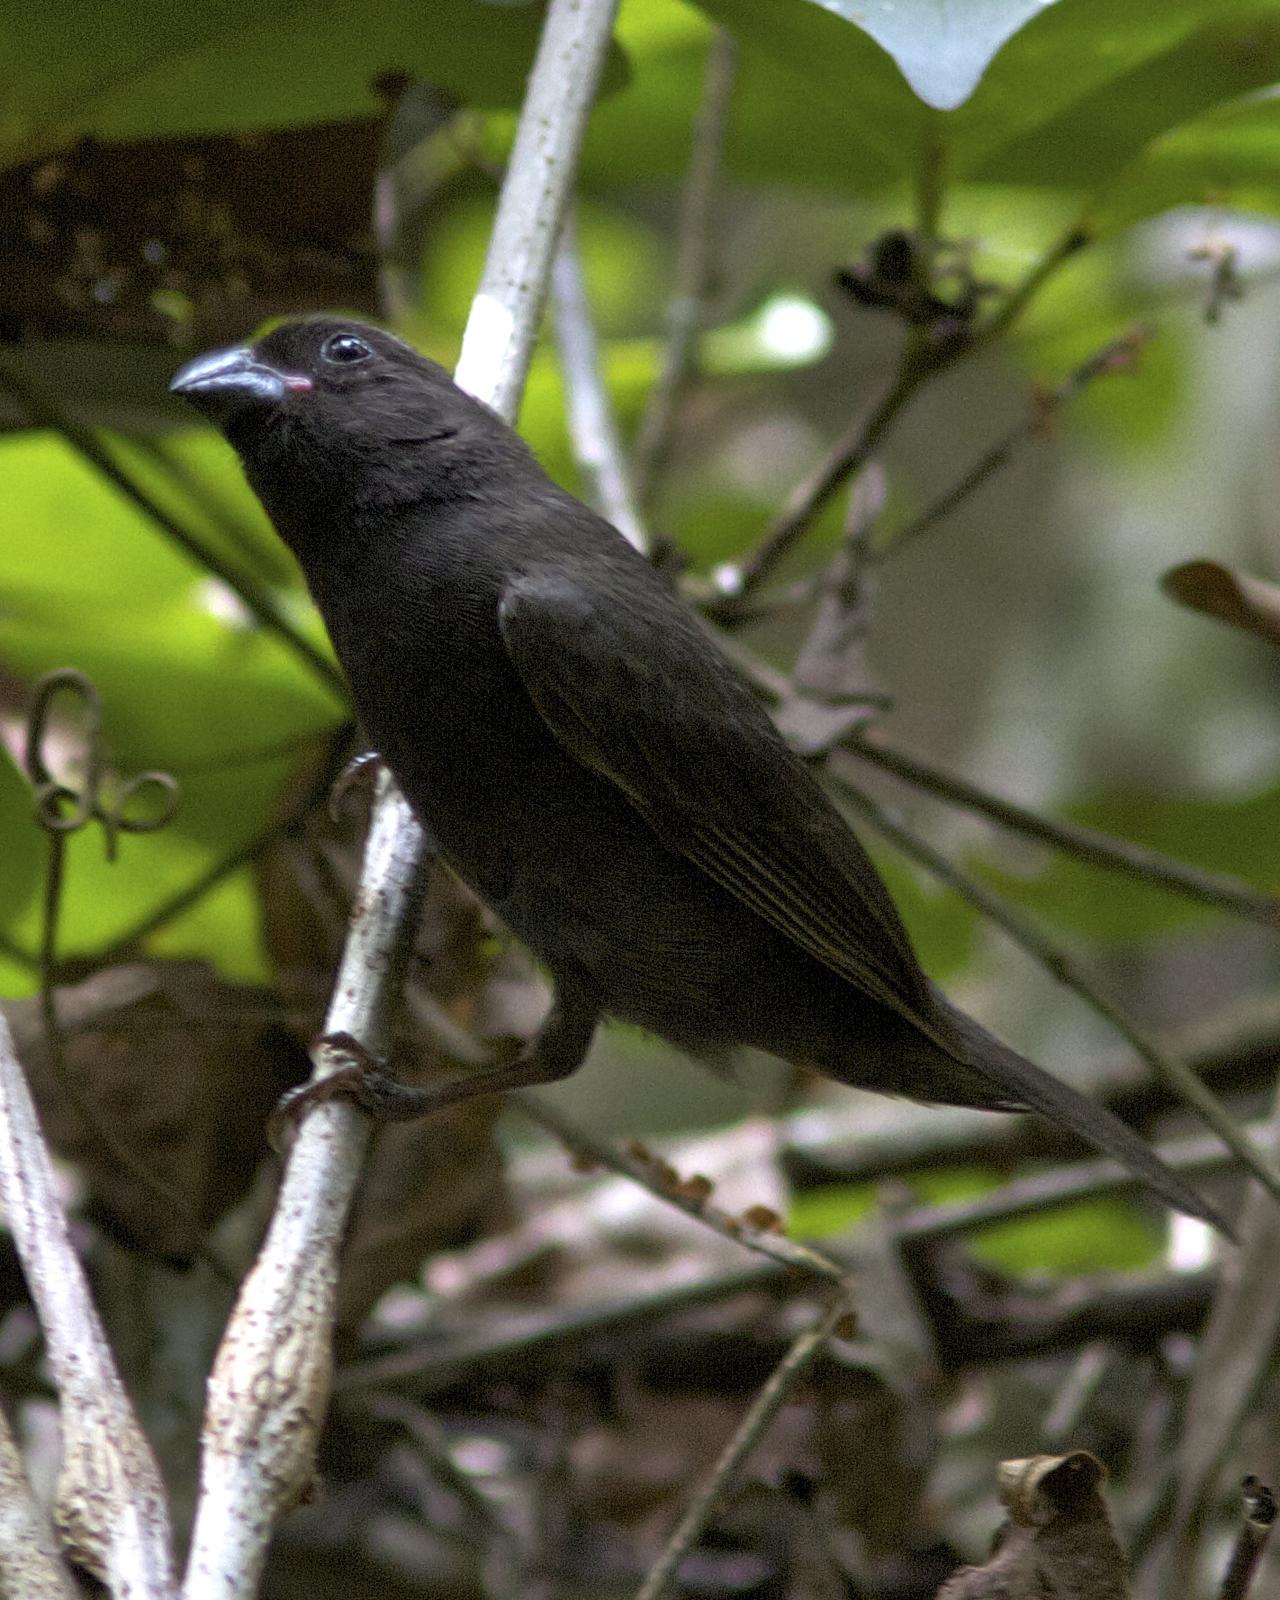 Sooty Grassquit Photo by Marcelo Padua